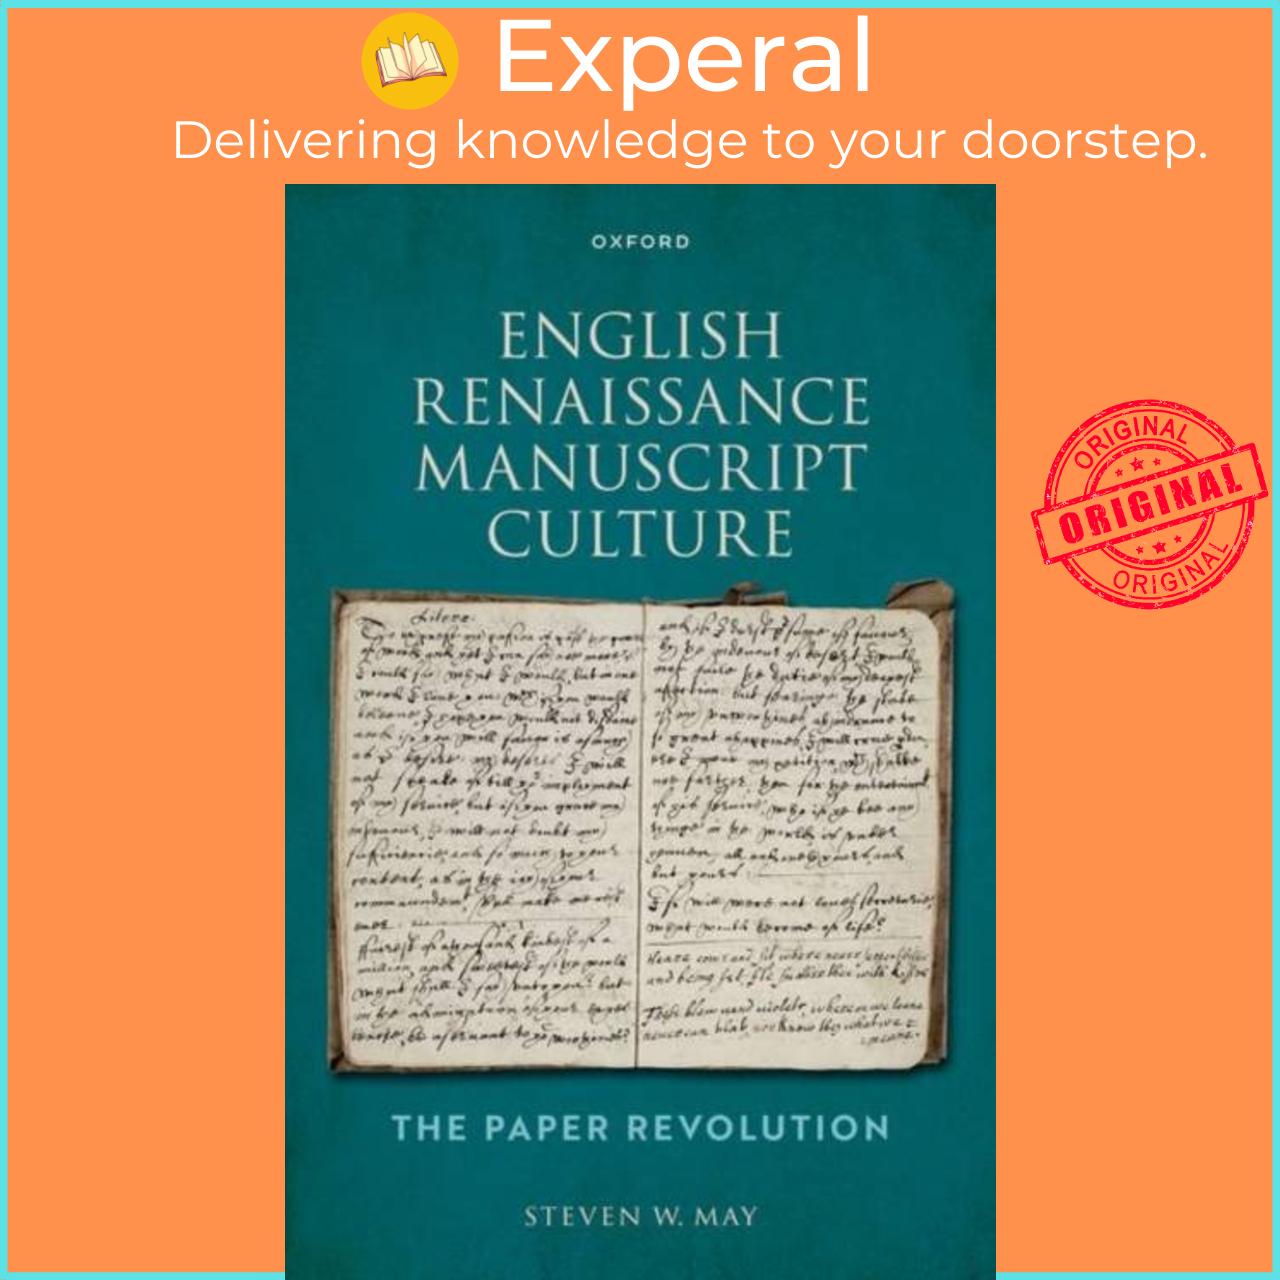 Sách - English Renaissance Manuscript Culture - The Paper Revolution by Steven W. May (UK edition, hardcover)